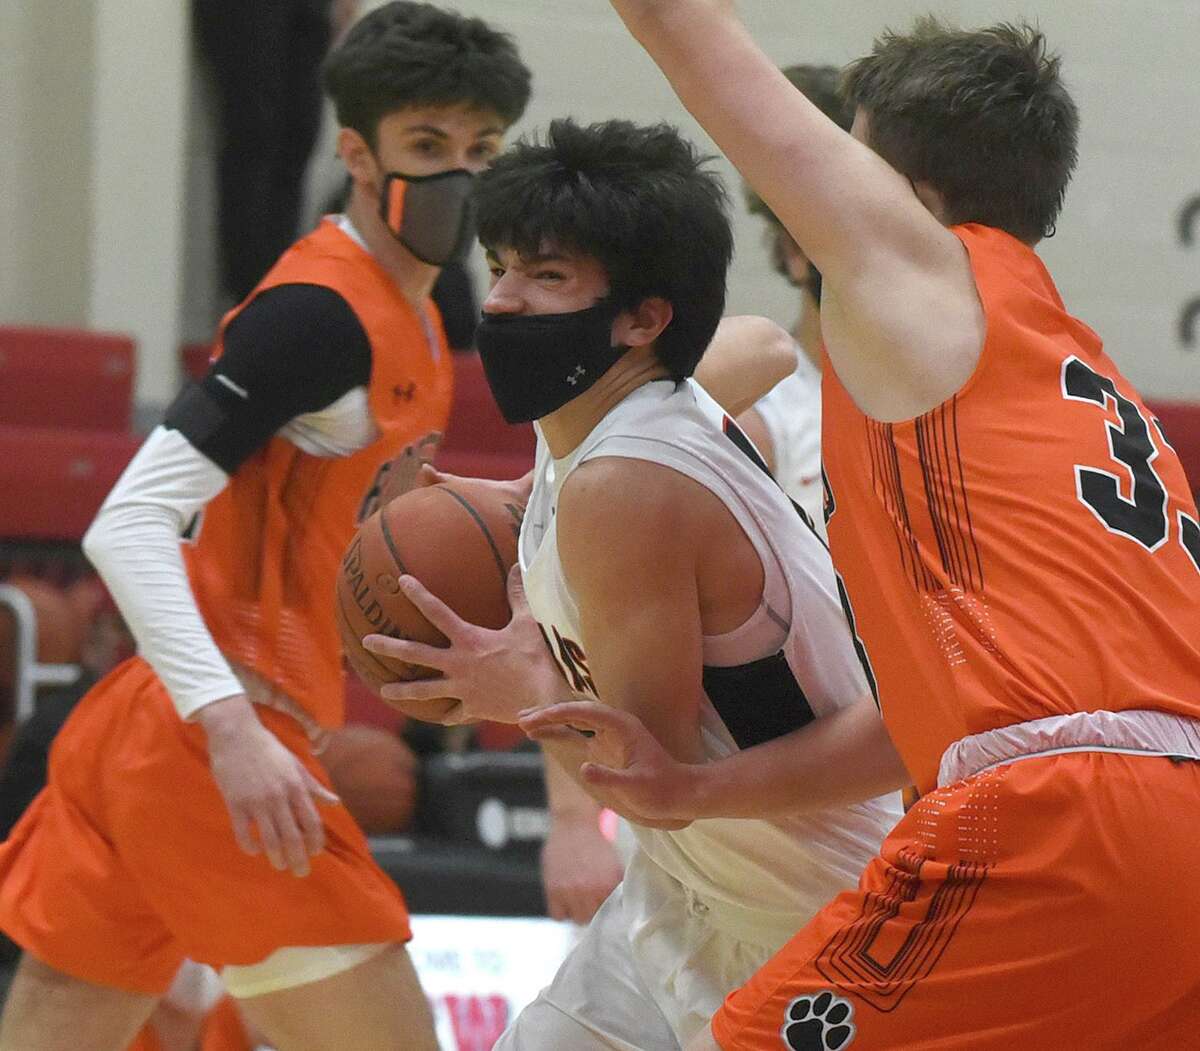 New Canaan's Will Bozzella (14) drives against Ridgefield's Dylan Veillette (33) during a boys basketball game at New Canaan High School on Wednesday, March 3, 2021.